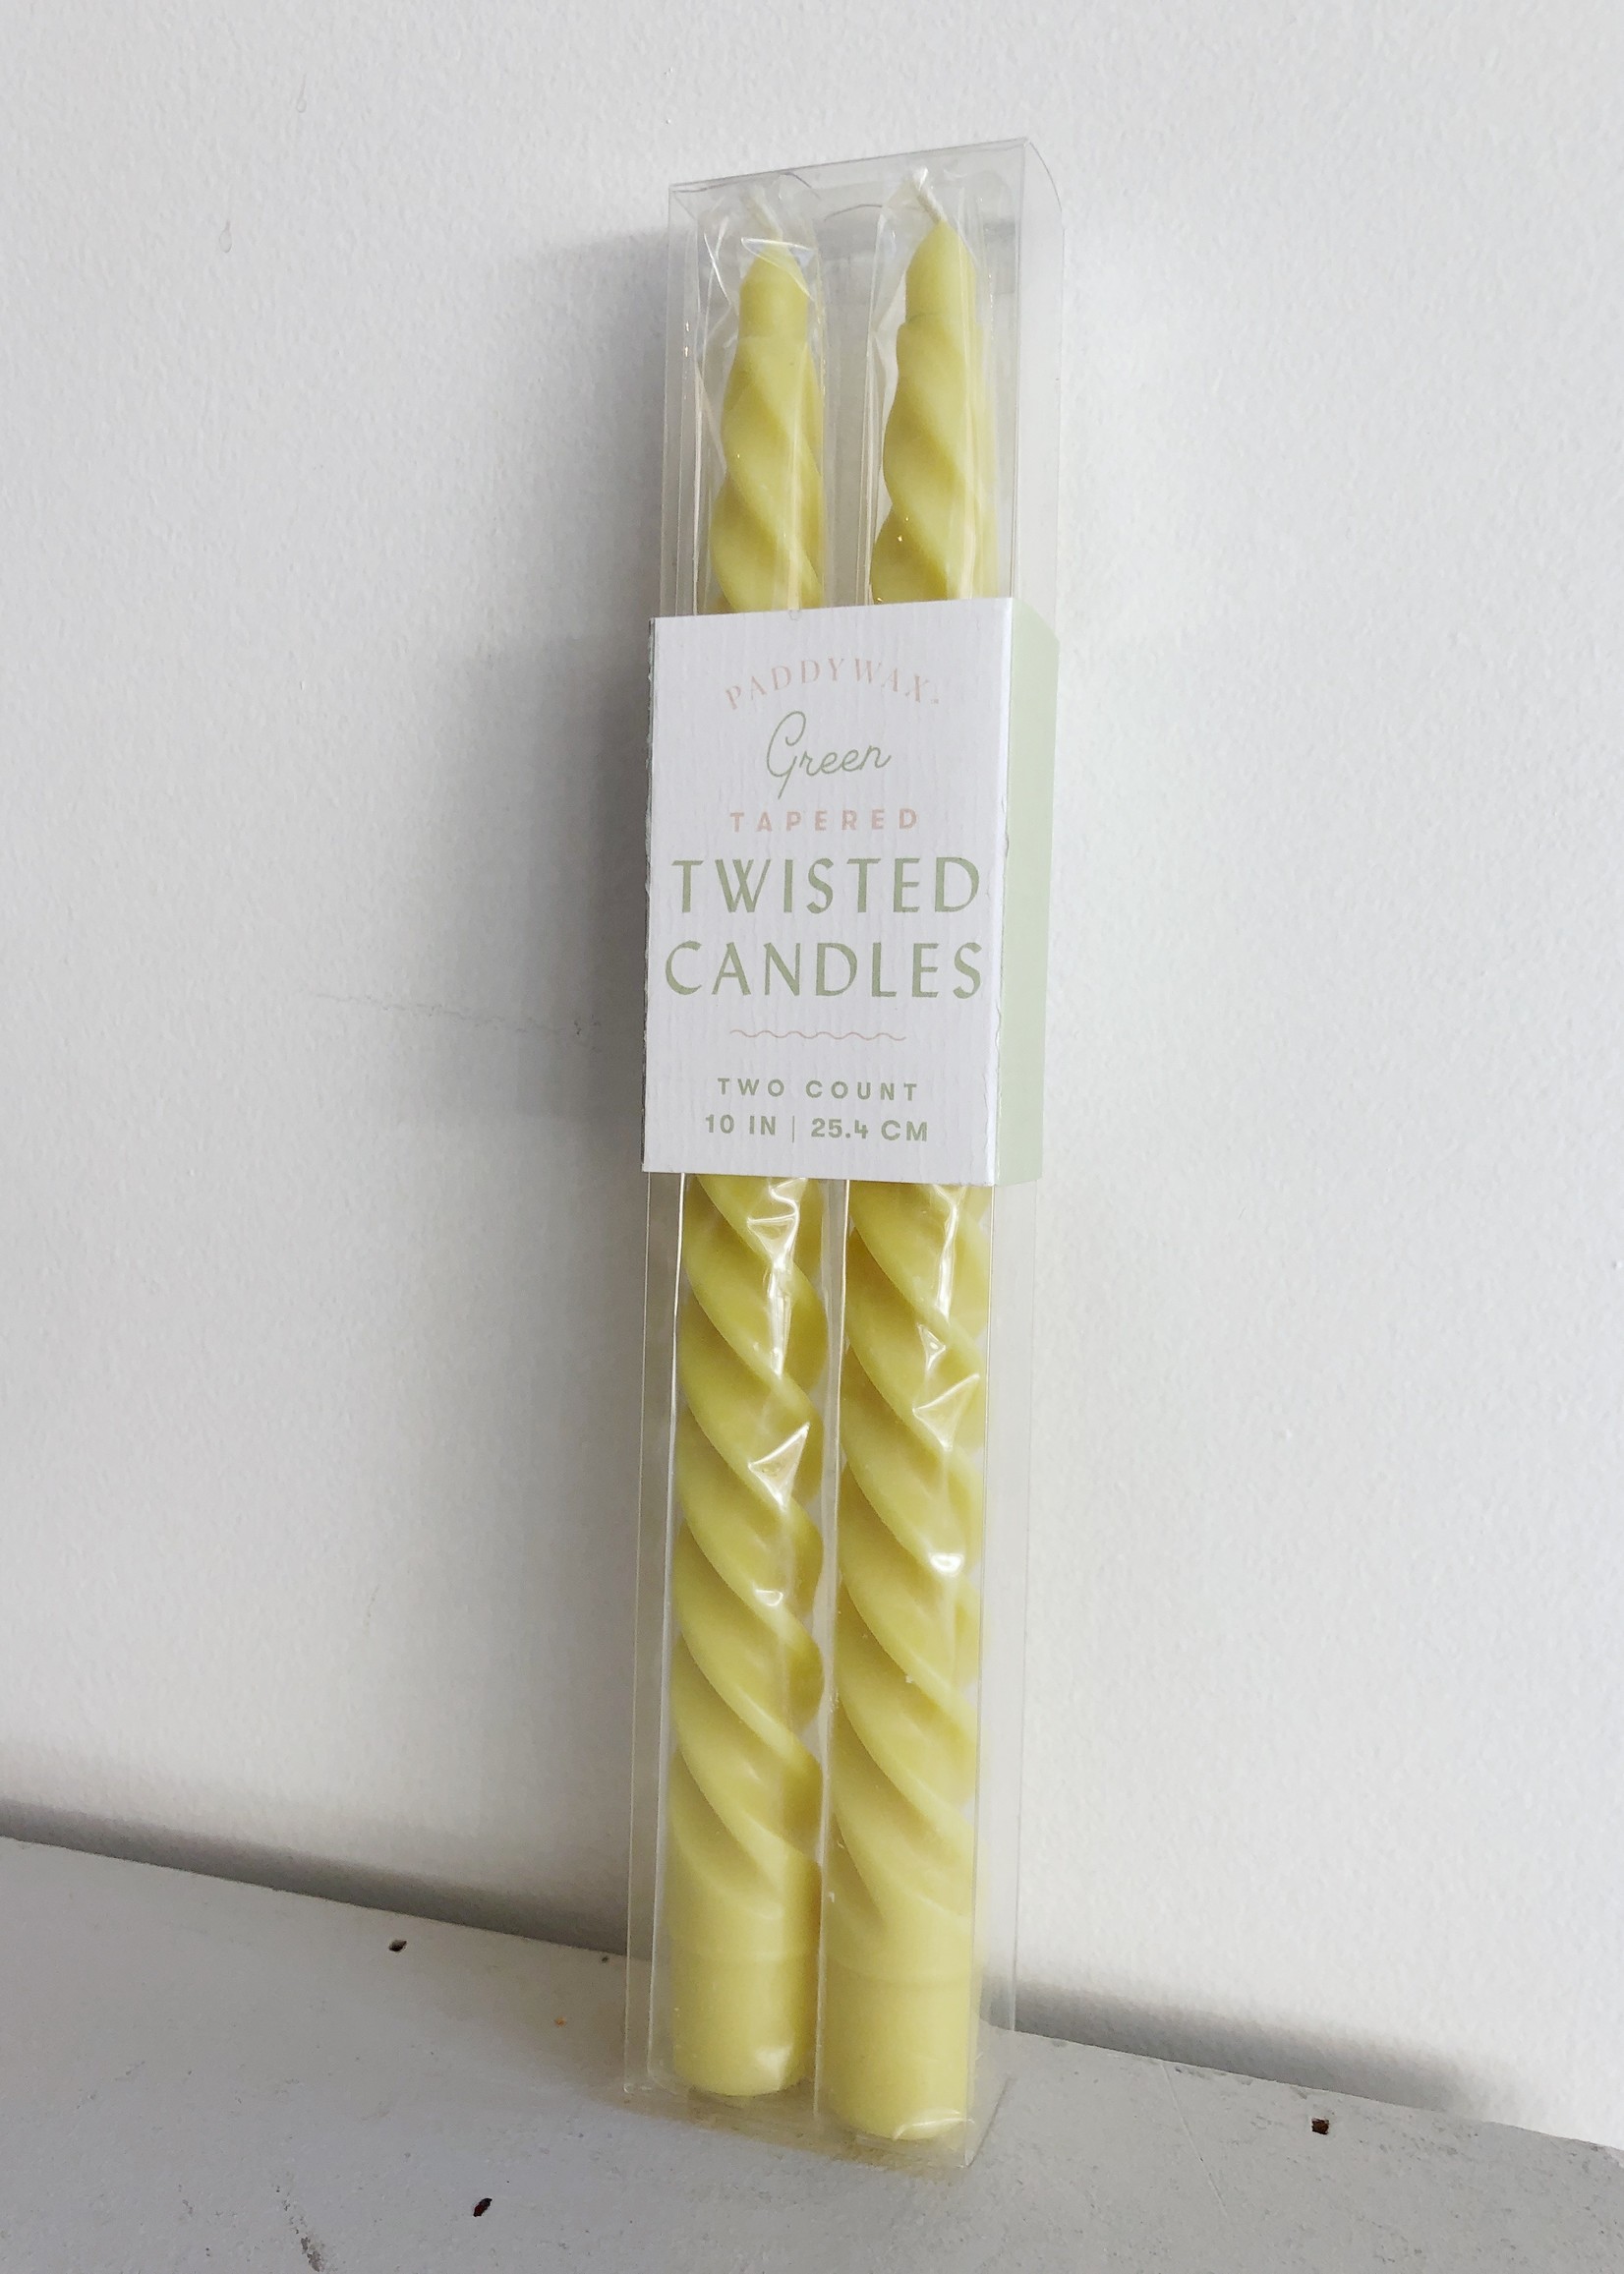 Paddywax Paire de bougies "Twisted" par Paddywax